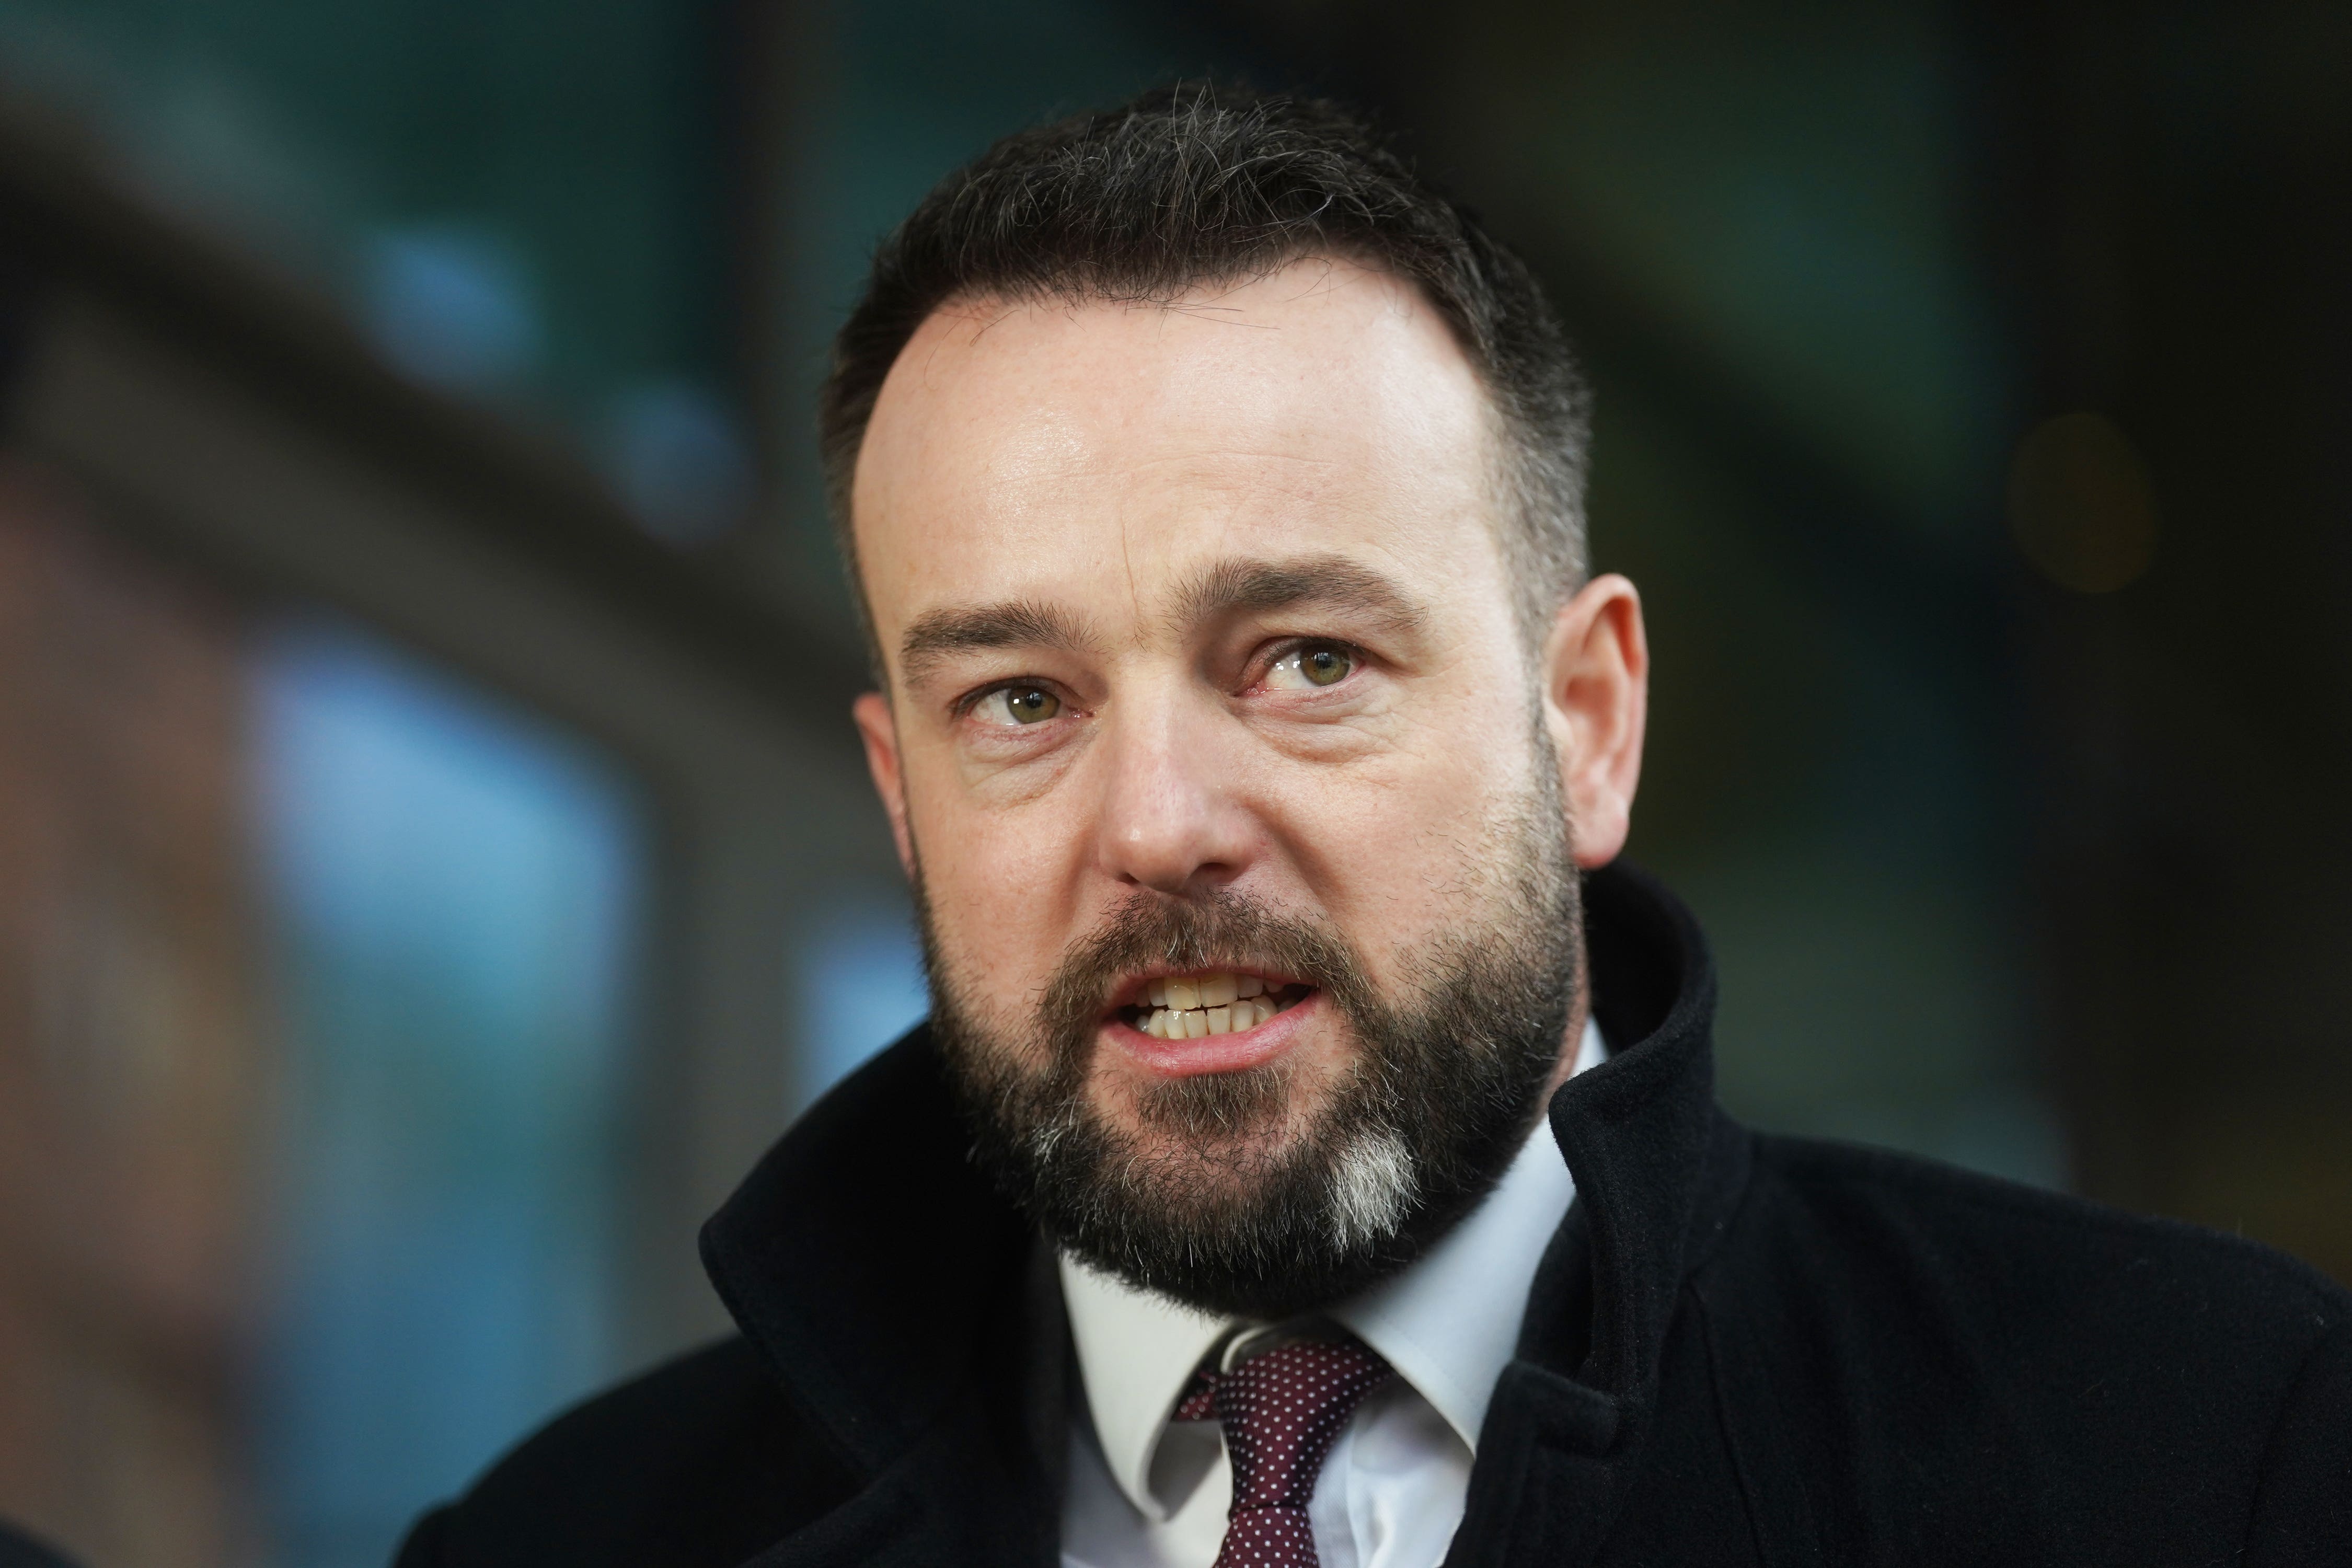 SDLP leader Colum Eastwood has backed the Windsor Framework (Brian Lawless/PA)